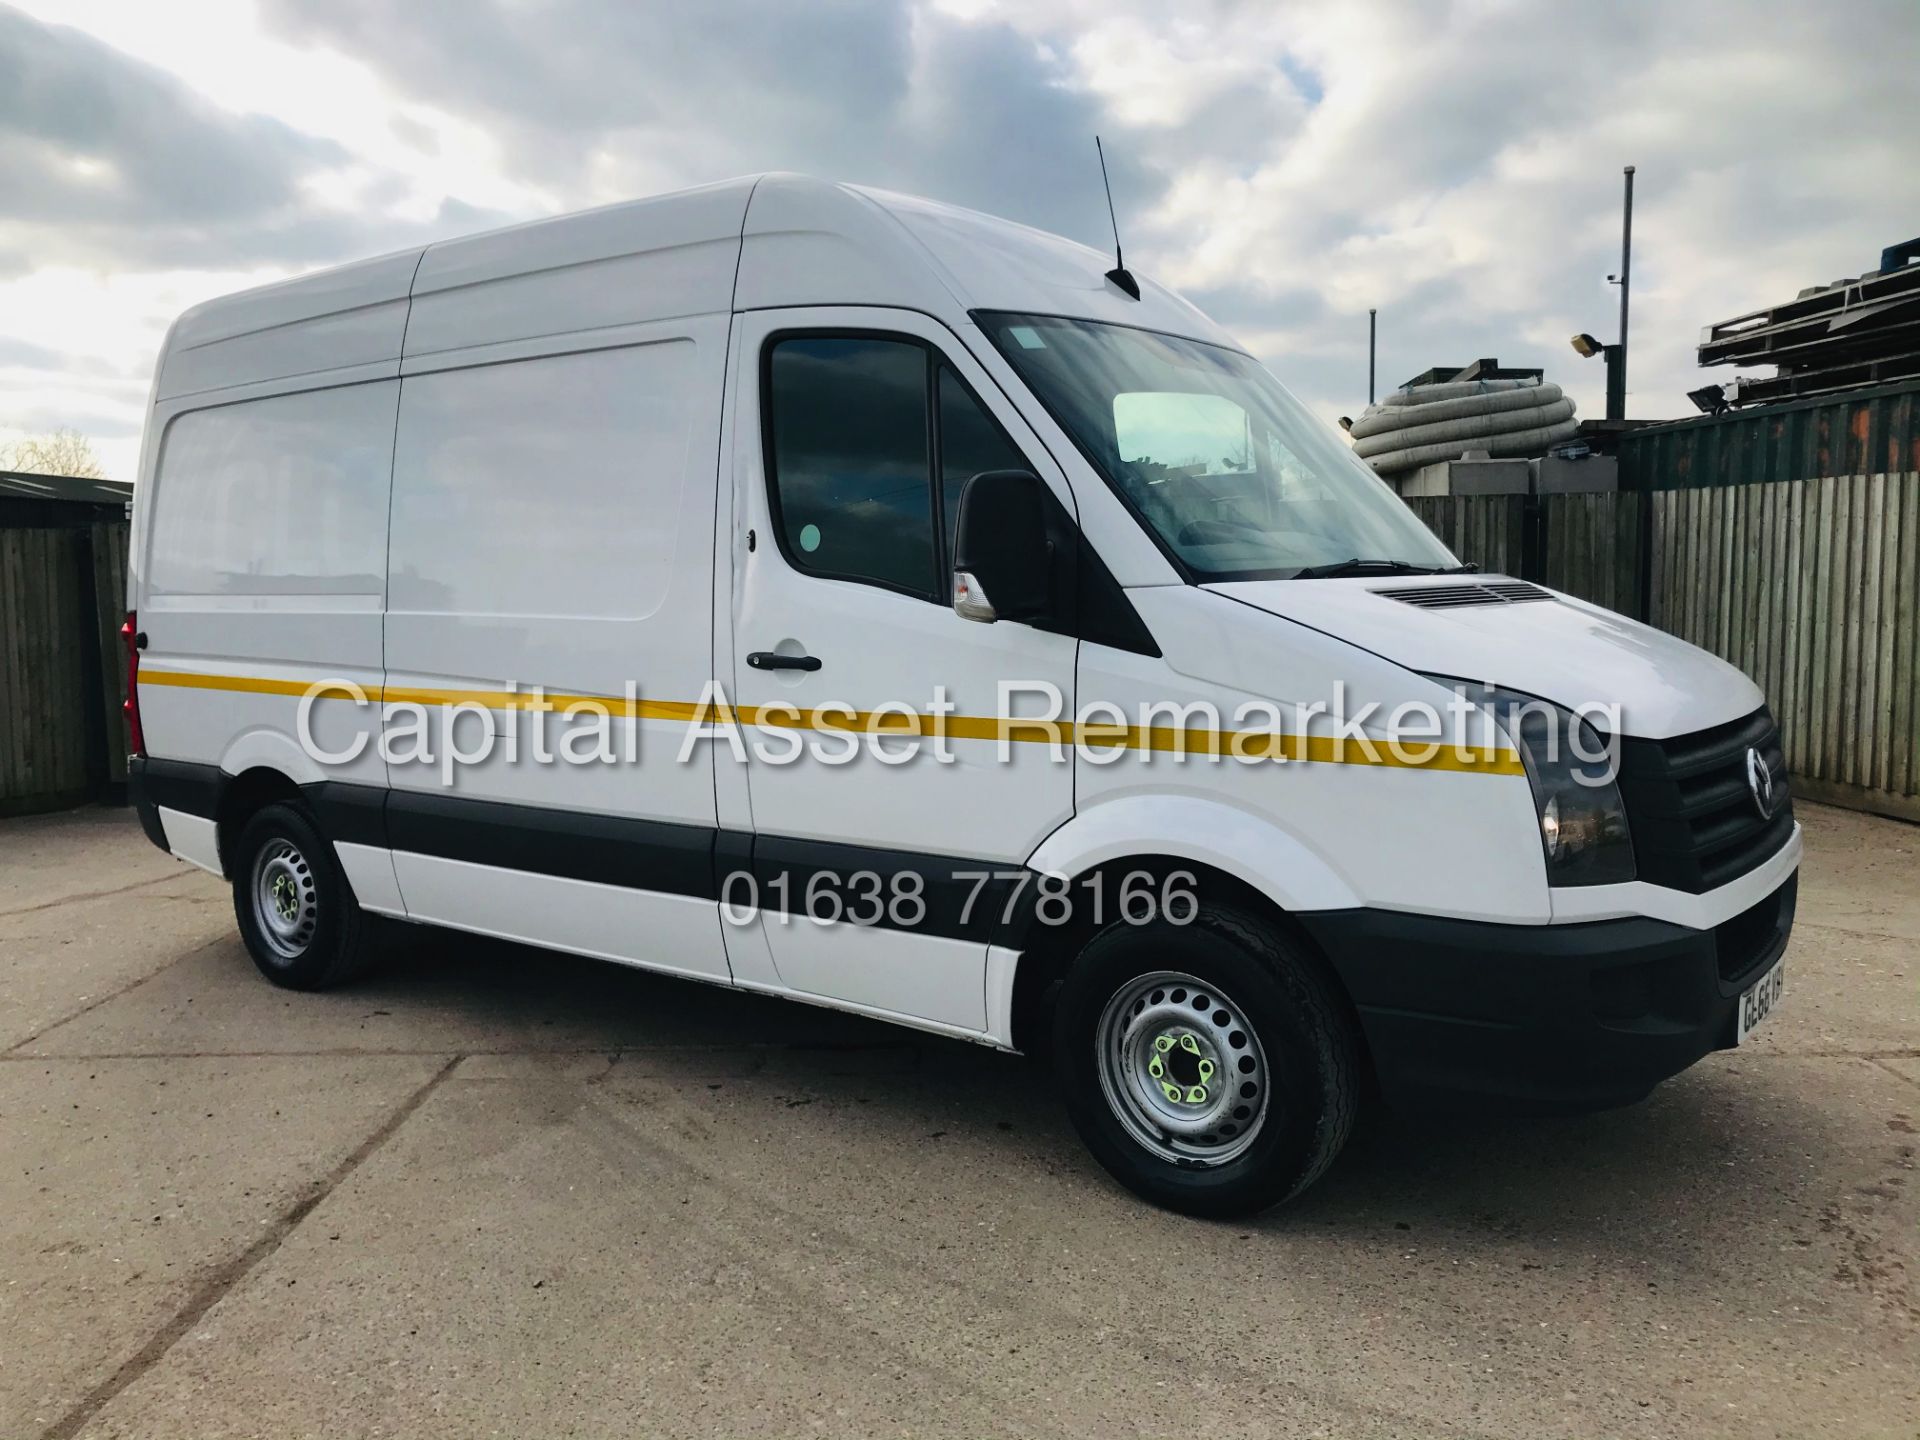 (ON SALE) VOLKSWAGEN CRAFTER CR35 2.0TDI "BLUE-MOTION" MWB (2017 MODEL) *EURO 6 / ULEZ COMPLIANT* - Image 2 of 17